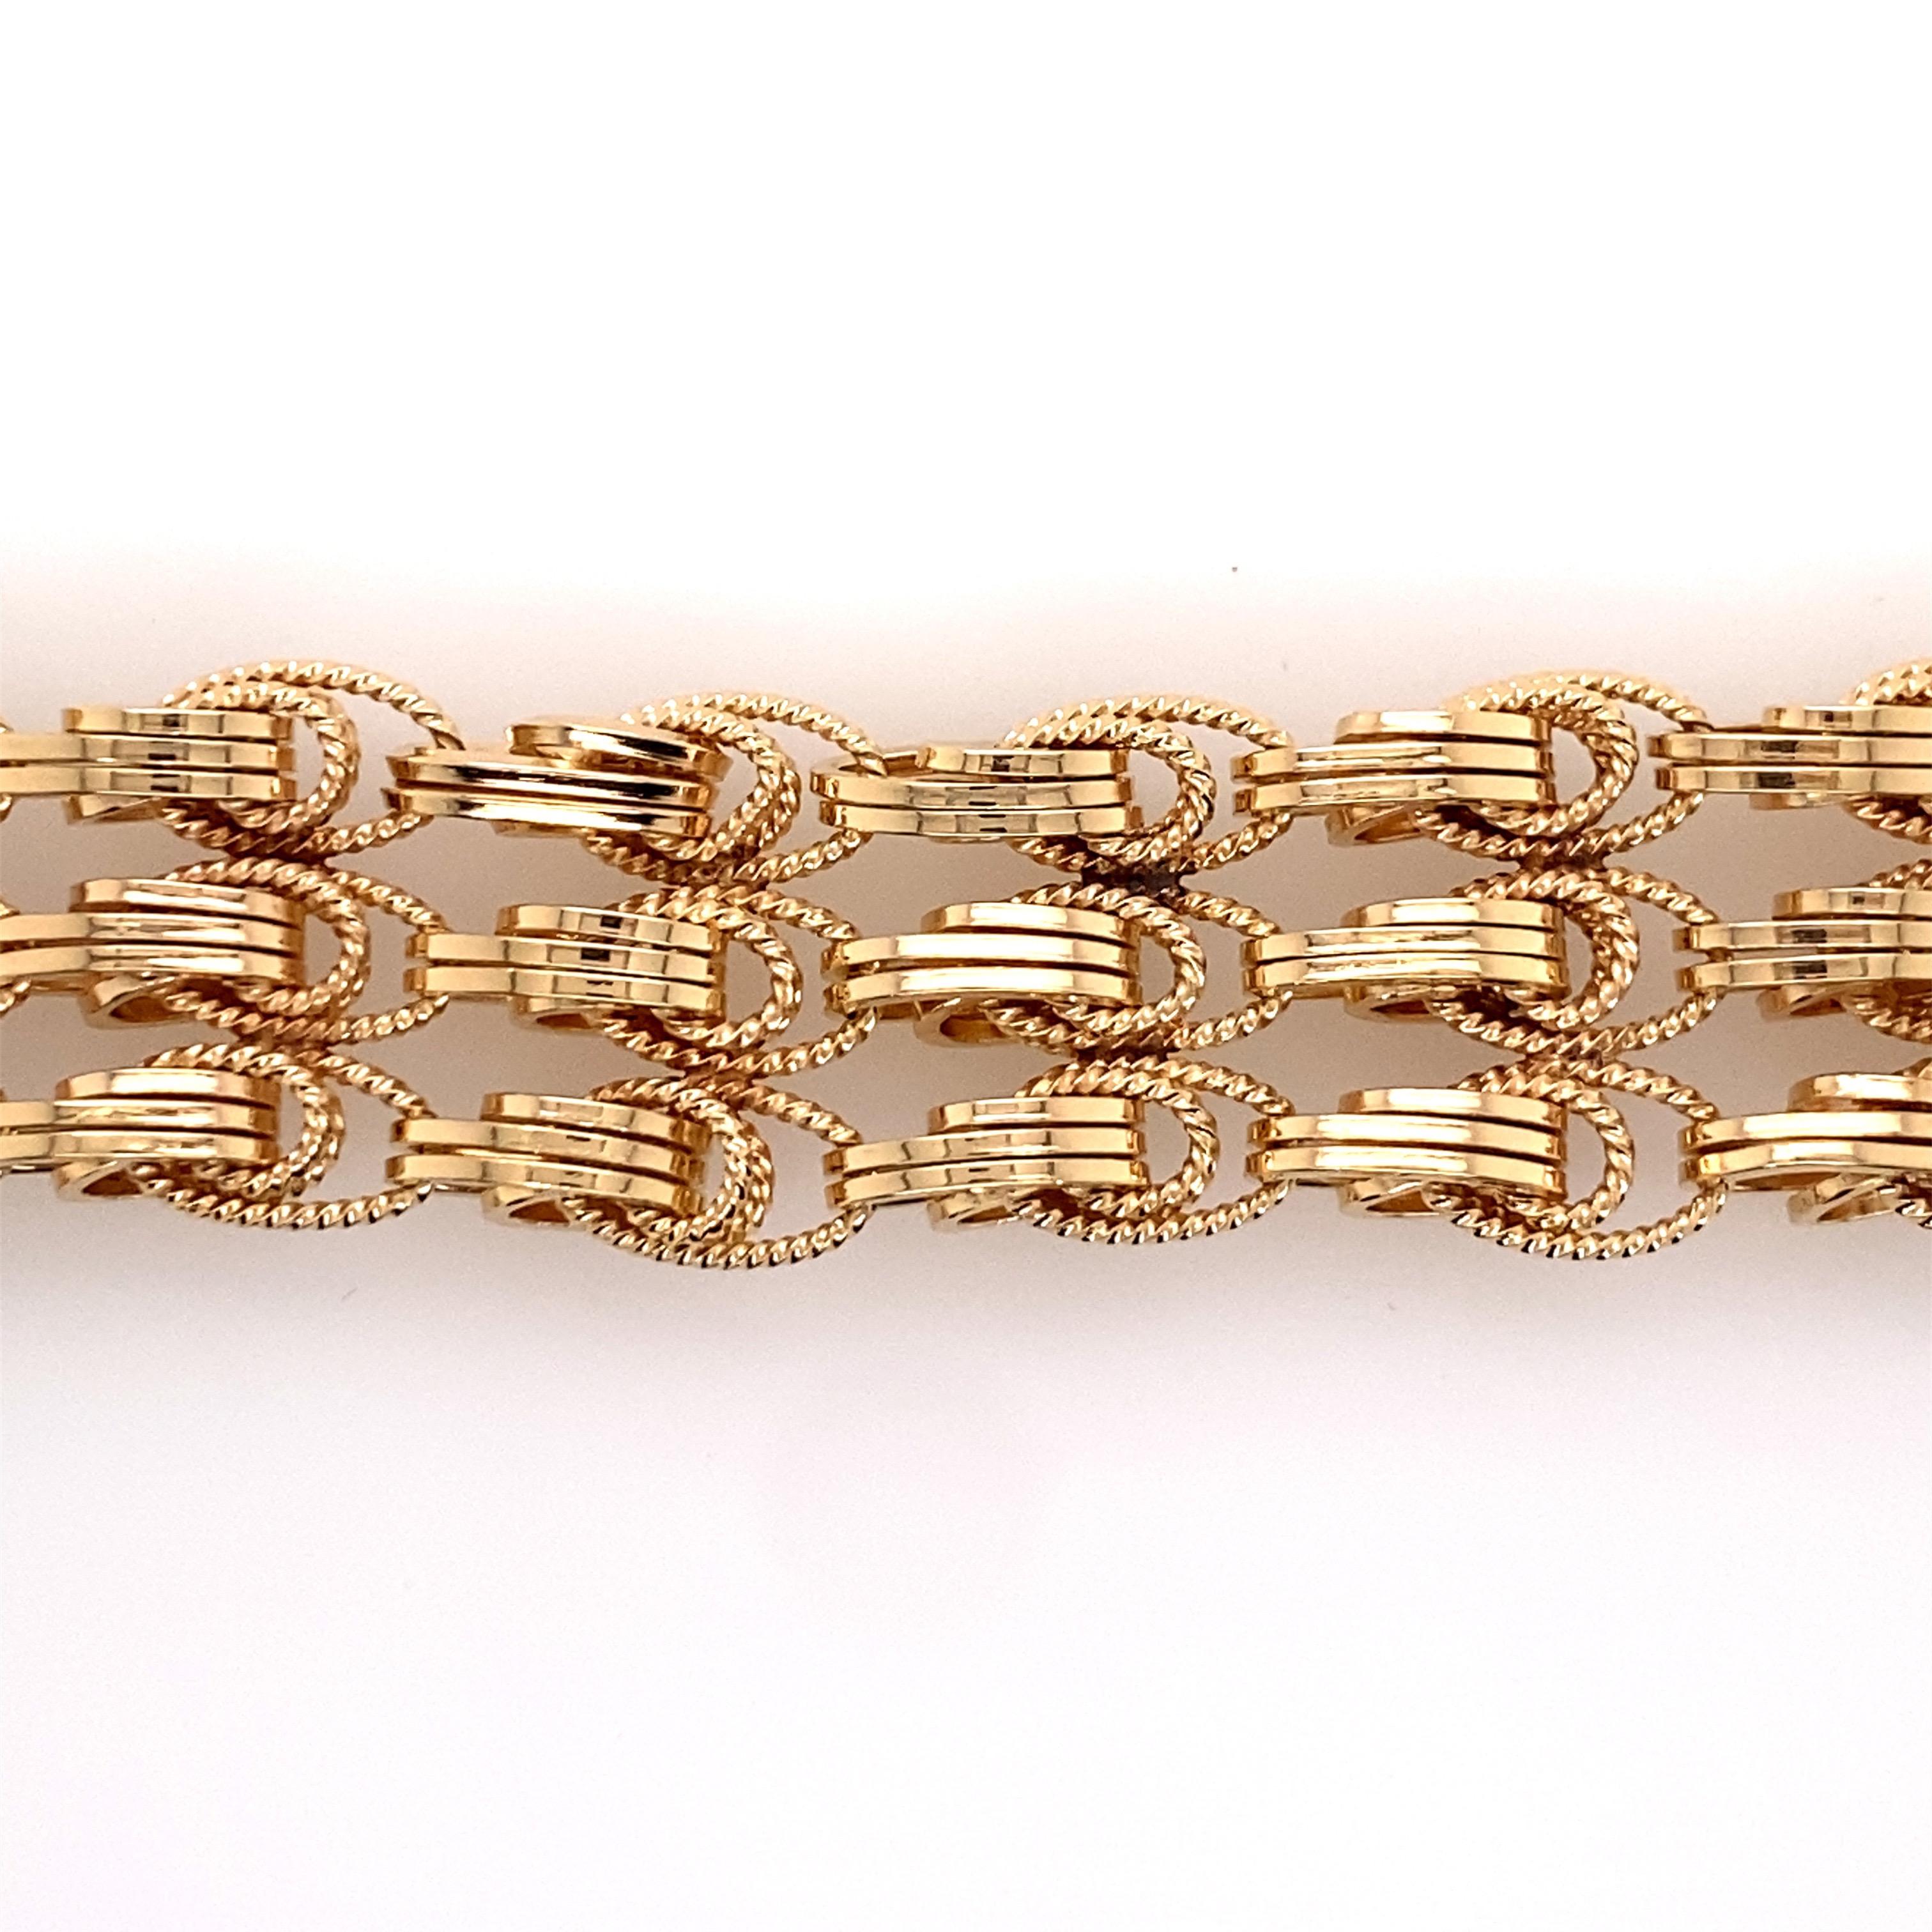 Vintage 1980's 14K Yellow Gold 3 Row Wide Link Bracelet - The bracelet measures 7 inches long and 3/4 inches wide. The bracelet features a hidden plunger clasp with a figure 8 safety. The bracelet weighs 48.8 grams.